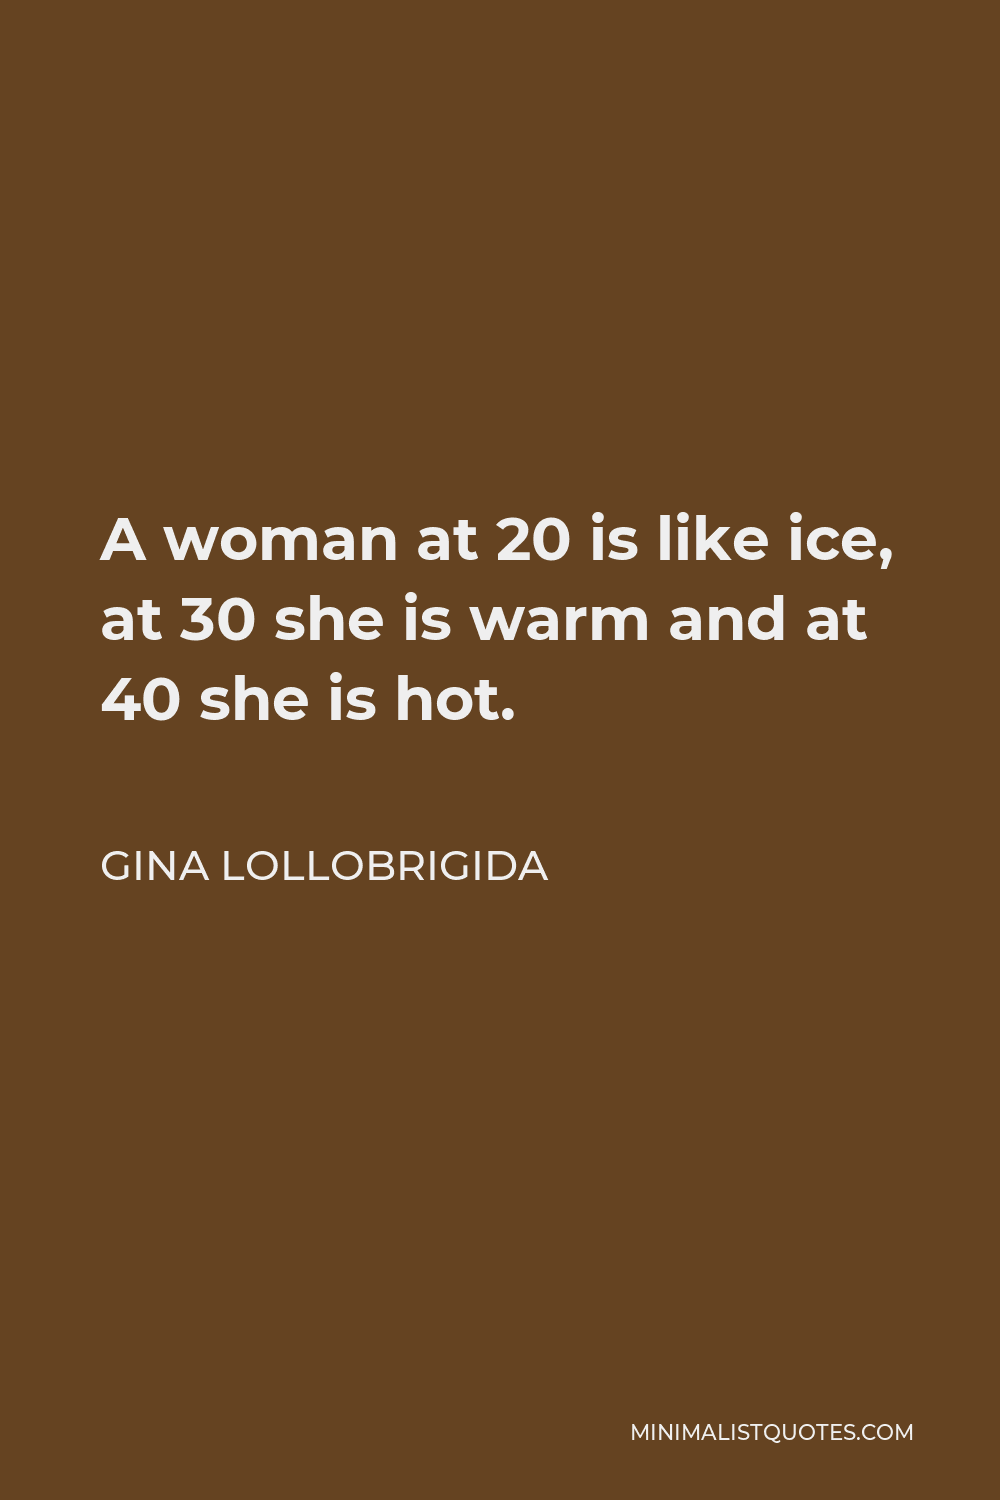 Gina Lollobrigida Quote - A woman at 20 is like ice, at 30 she is warm and at 40 she is hot.